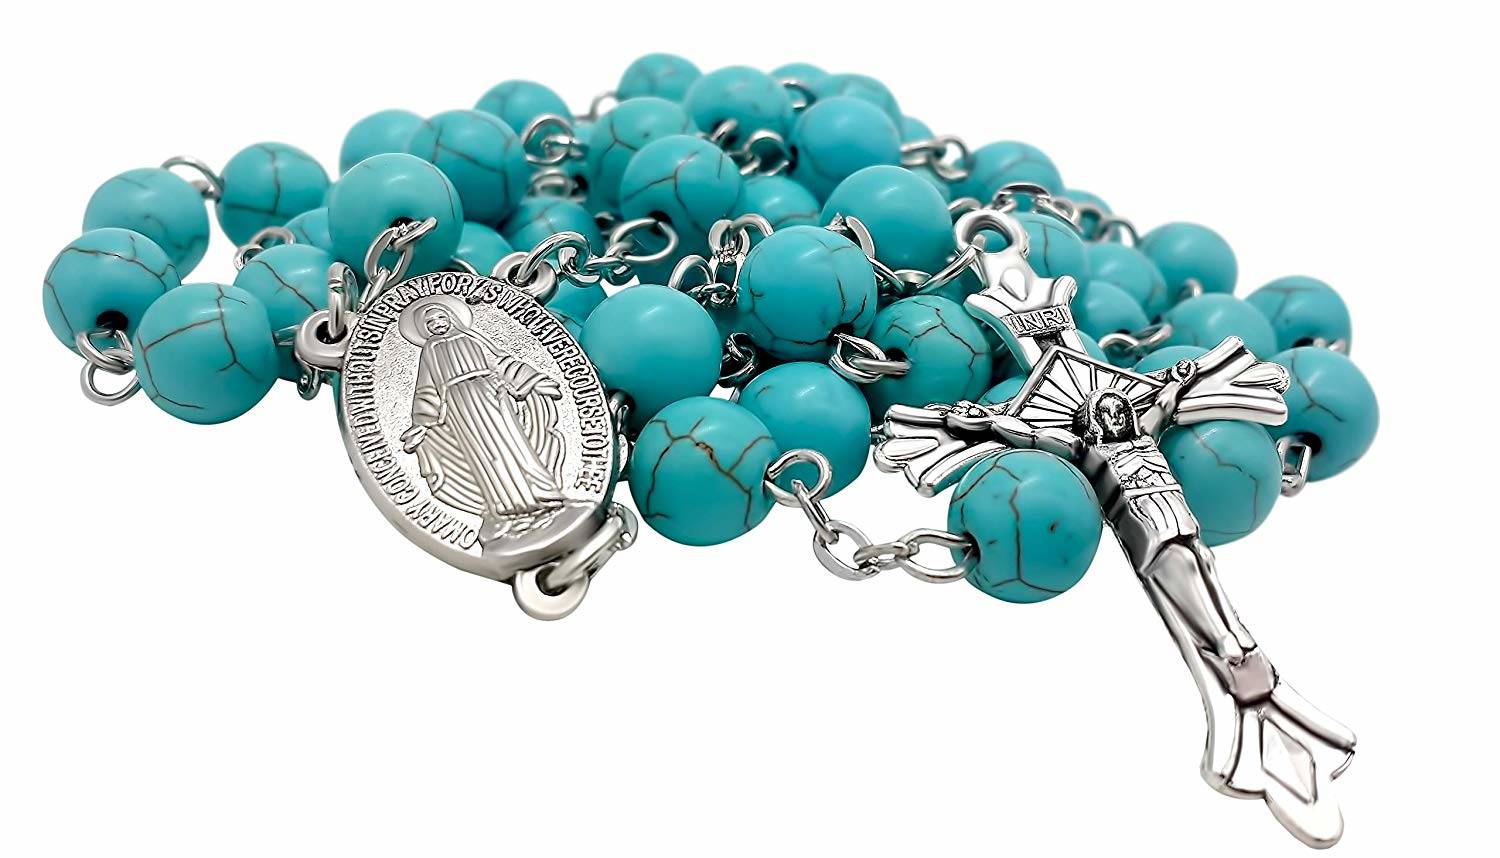 Velvet Bag Nazareth Store Catholic Turquoise Marble Glass Beads Rosary Necklace Miraculous Medal /& Cross